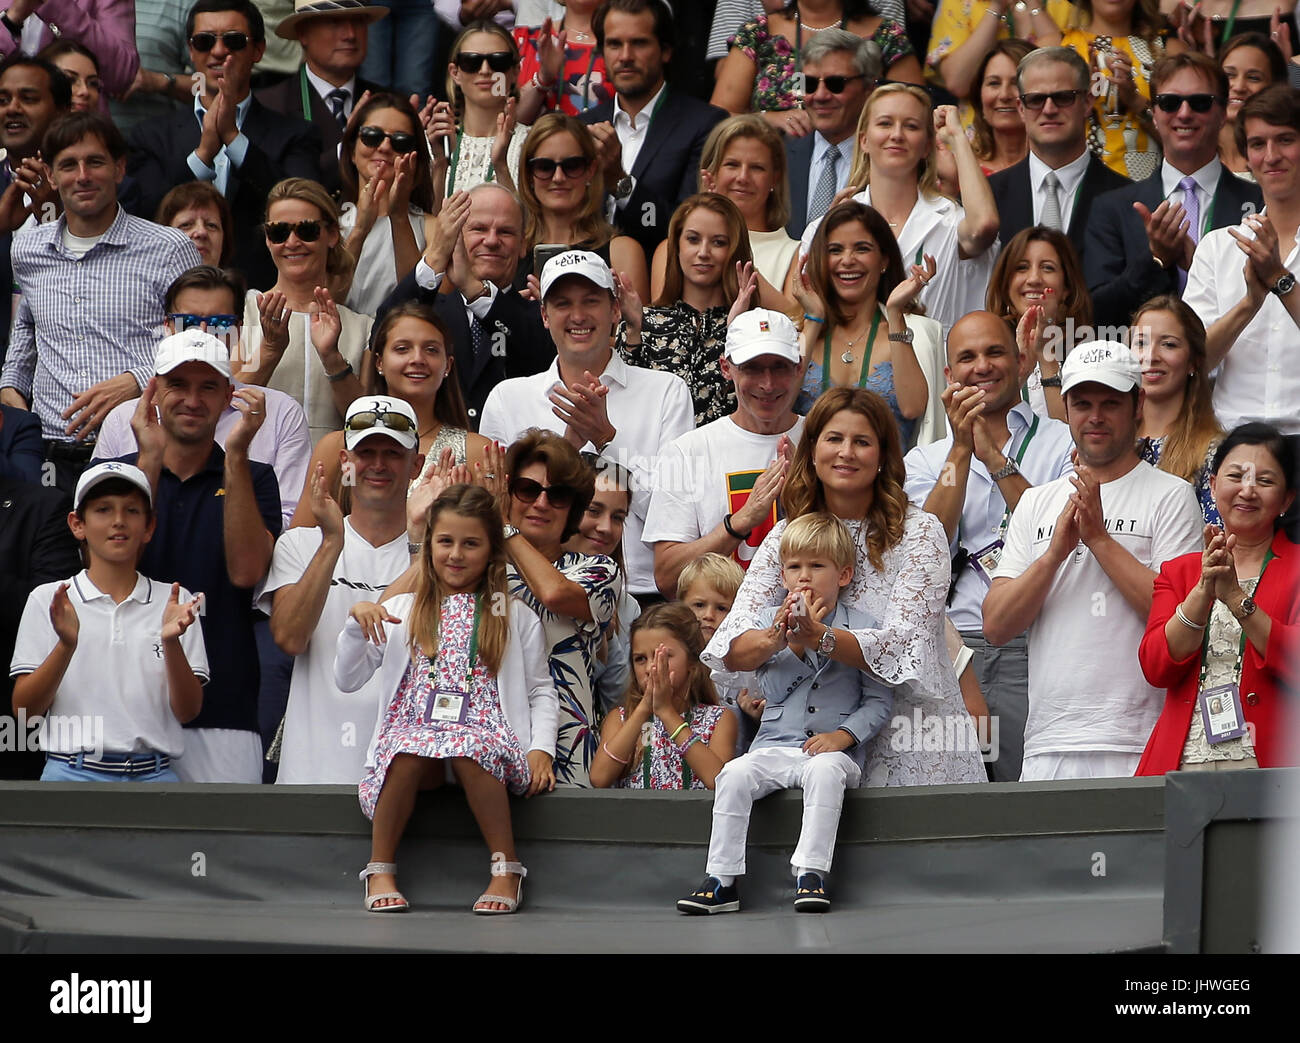 Charlene Riva Federer, Myla Rose Federer, Lenny Federer, Leo Federer, with their mother Mirka Federer and grandmother, Lynette Federer after Roger Federer wins the the Gentlemen's Singles Final on day thirteen of the Wimbledon Championships at The All England Lawn Tennis and Croquet Club, Wimbledon. Stock Photo